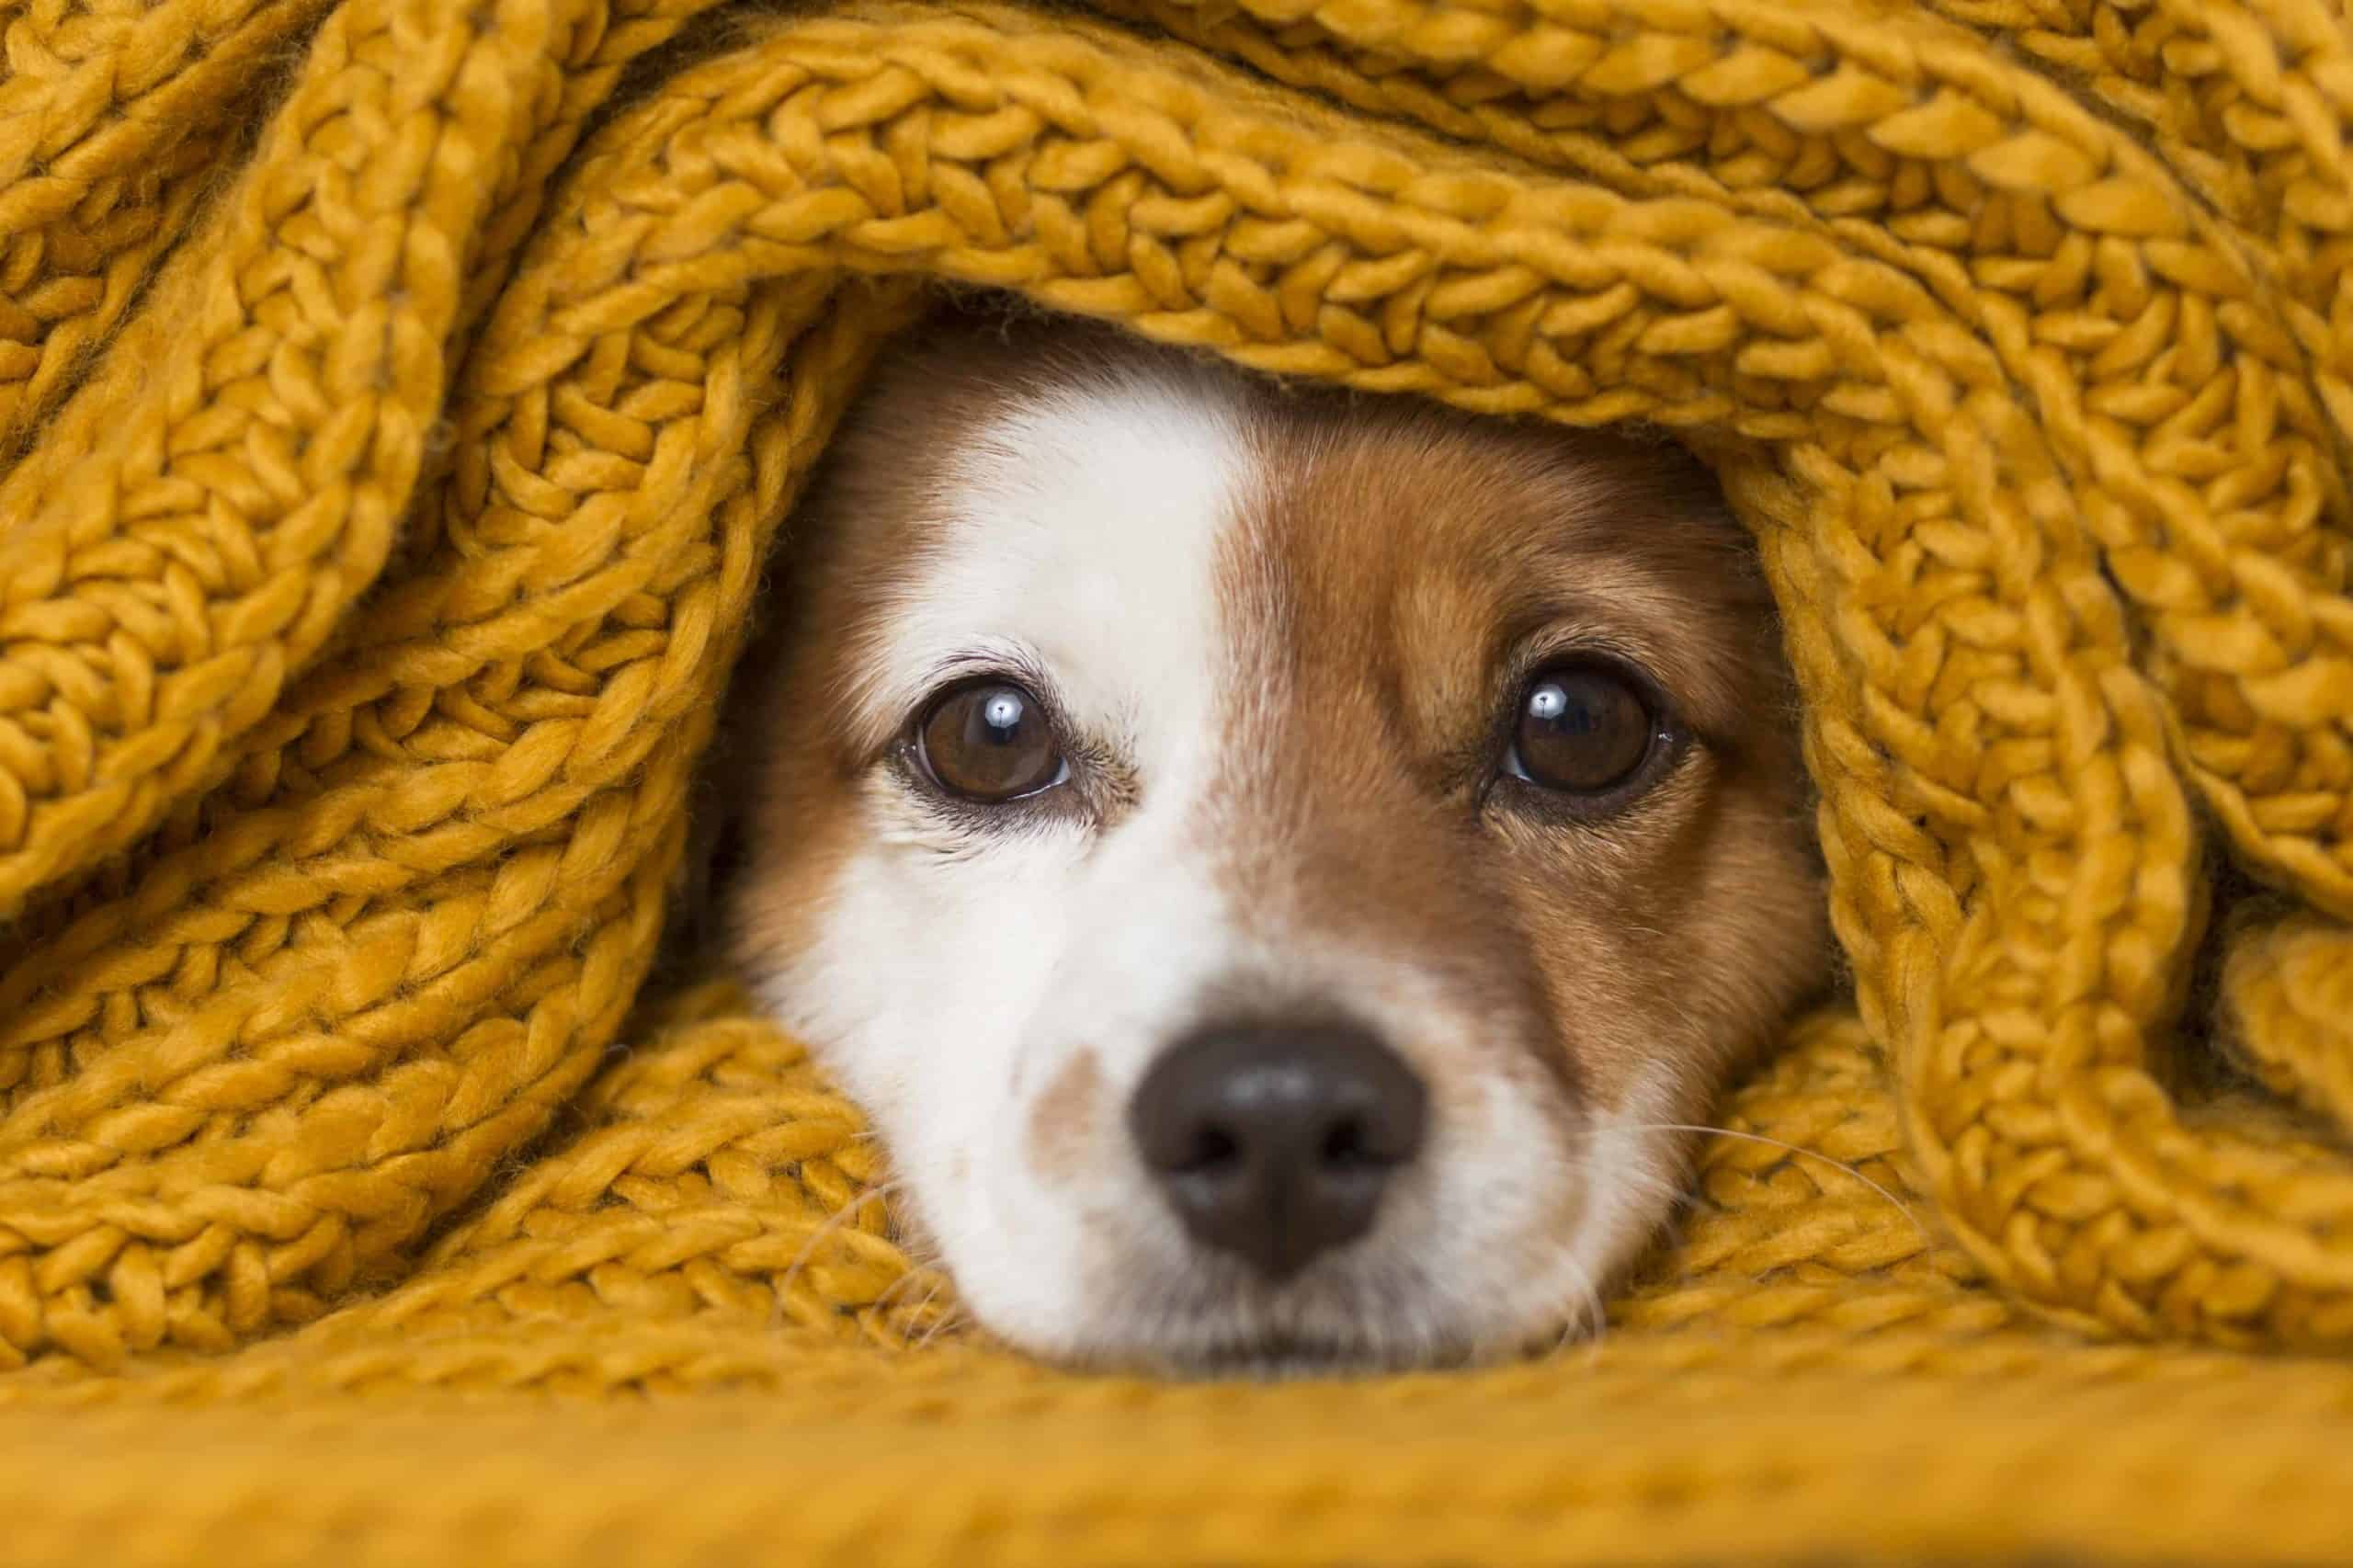 Jack Russell wrapped in a knitted blanket. Benadryl for dogs is safe but the dose needs to be determined by your dog's weight. Consult your vet before giving your dog any medication.